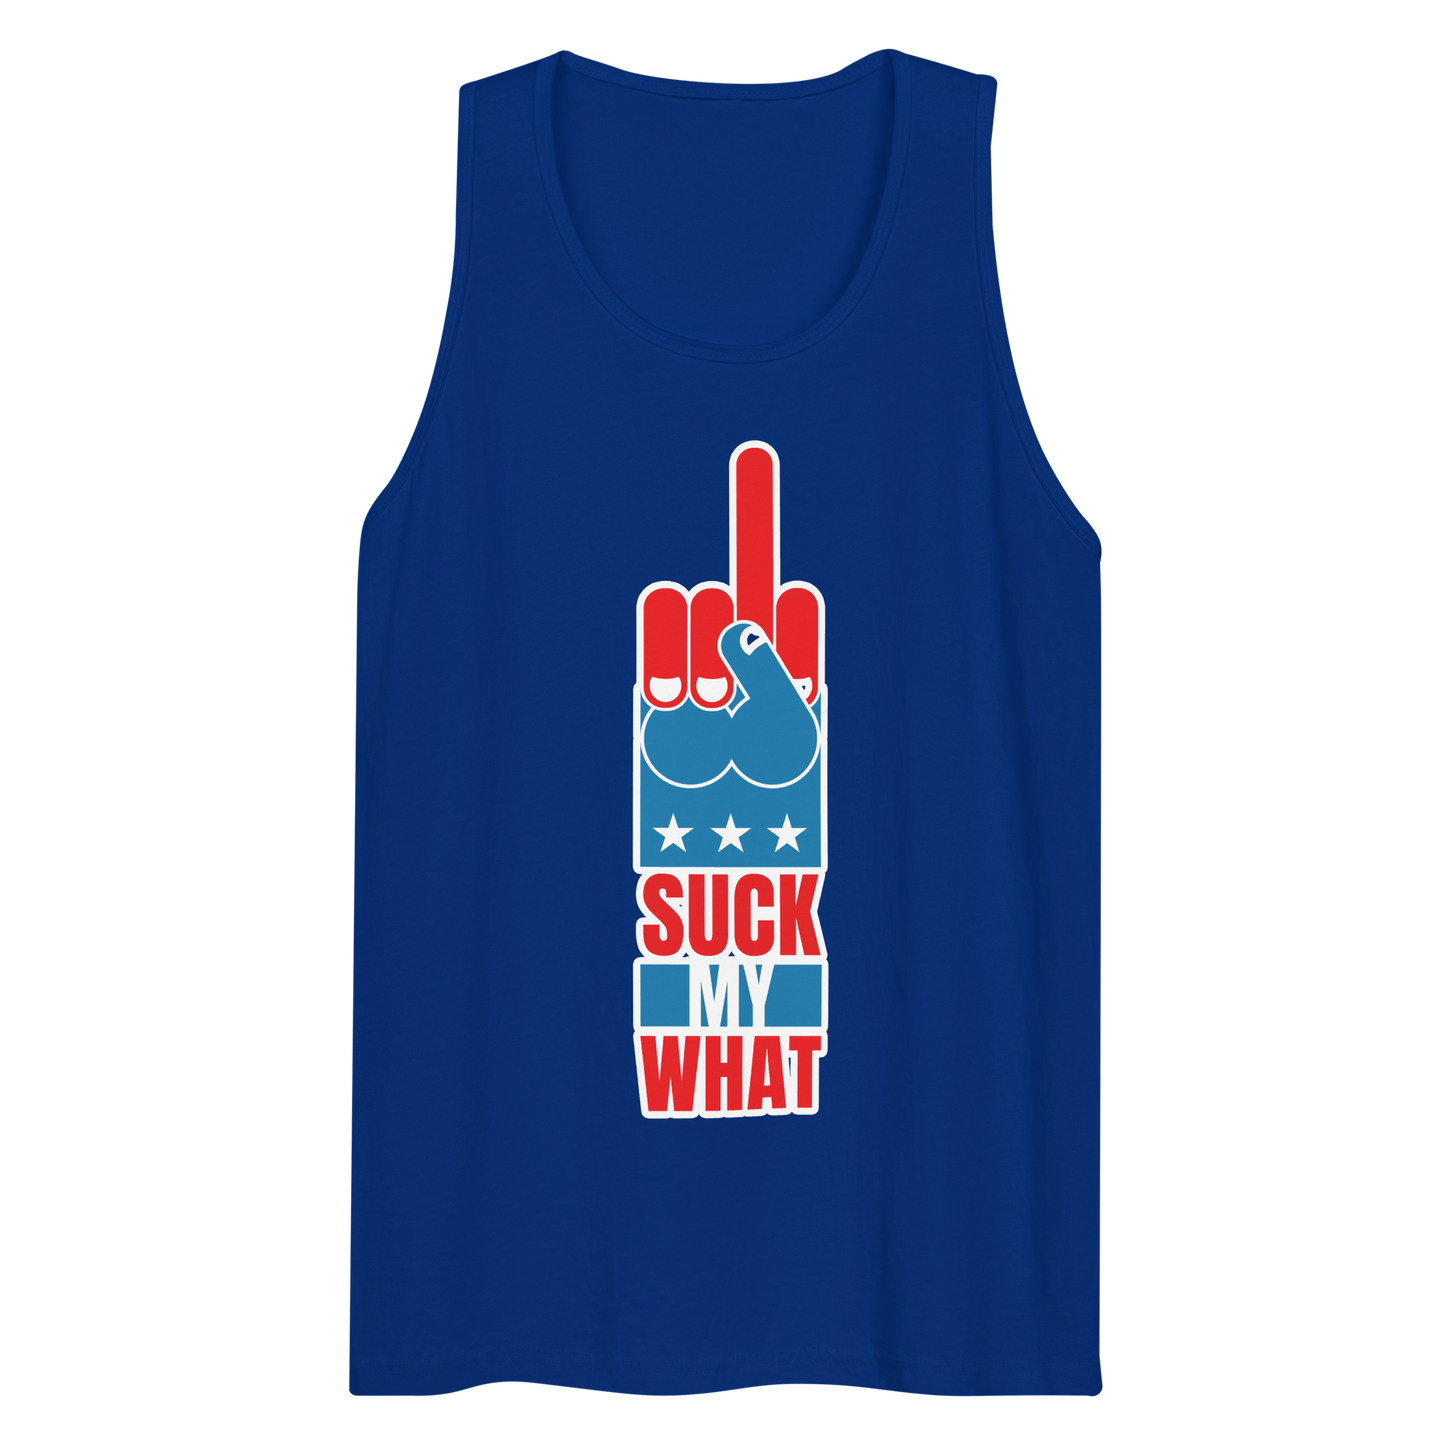 Patriot Missile Suck My What Premium Blue Tank Top - Independence Day, 4th of July, USA